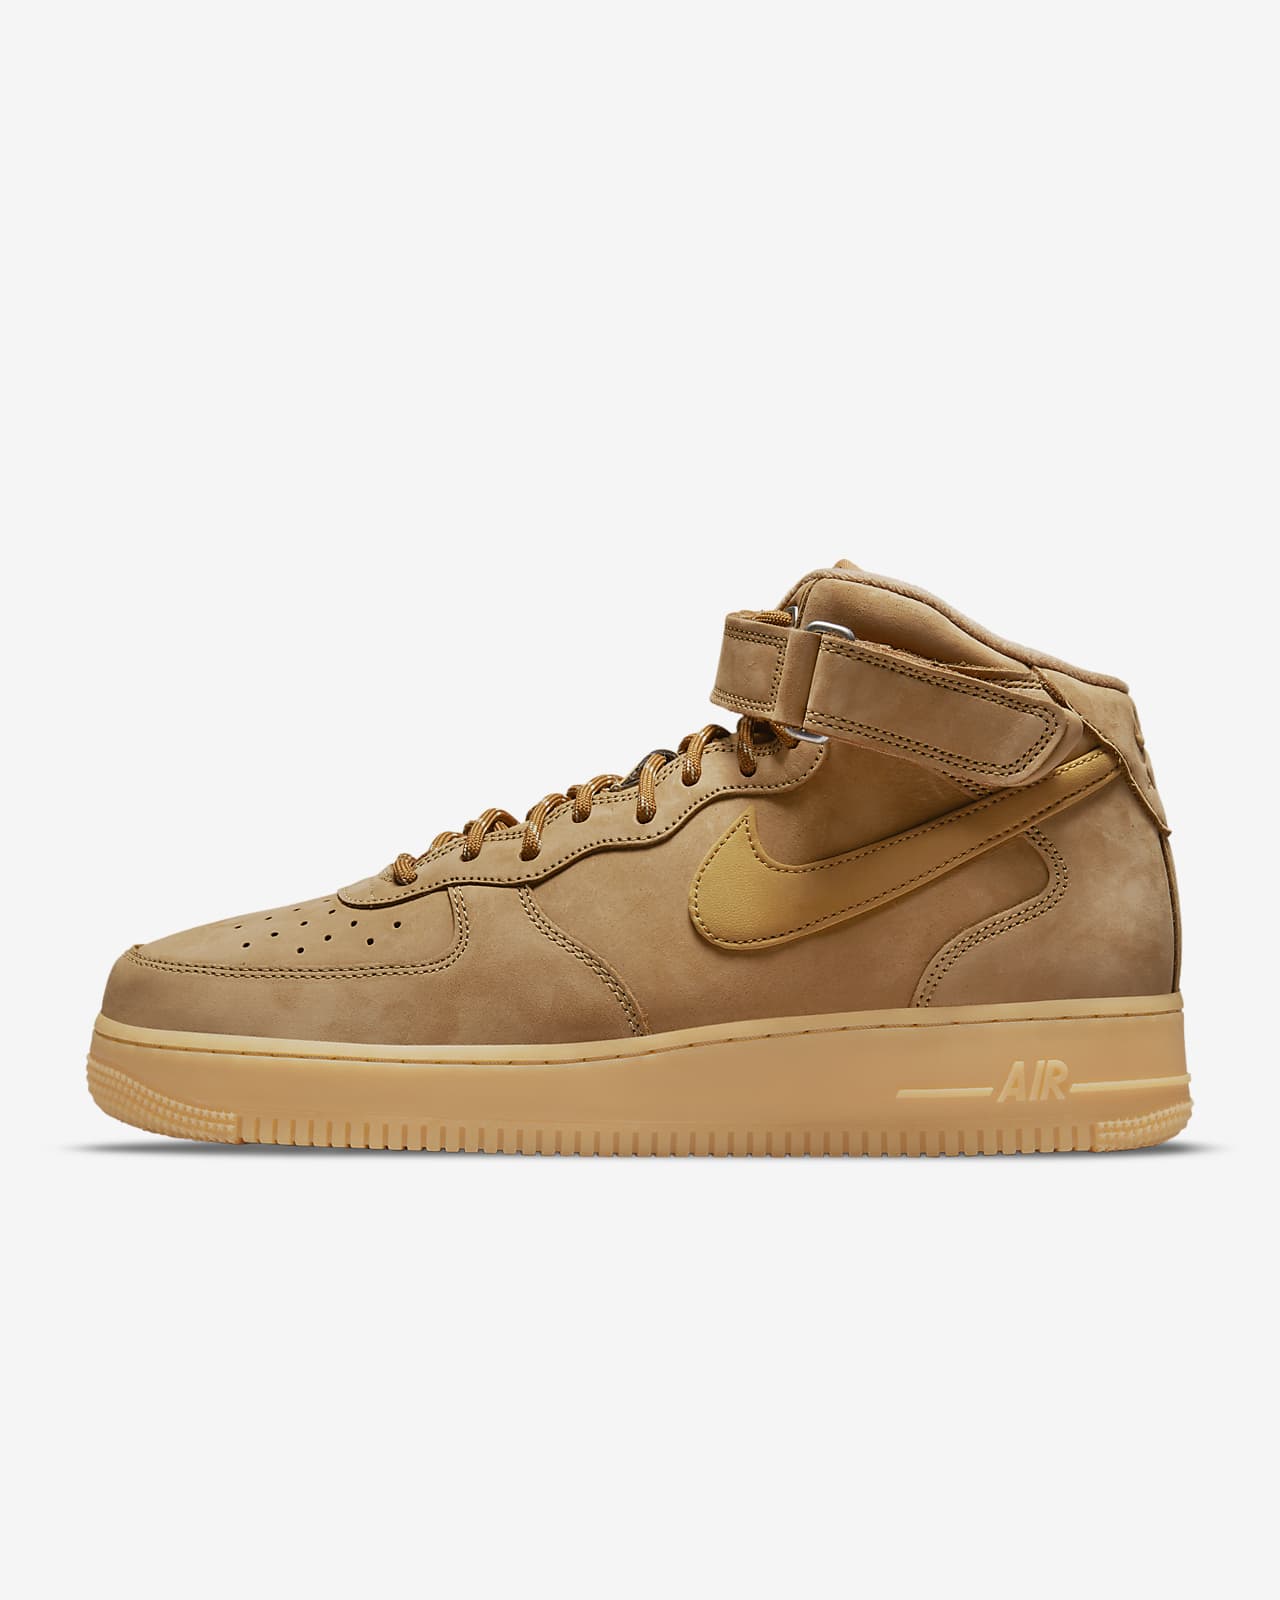 Chaussures Nike Air Force 1 Mid '07 pour Homme. Nike LU